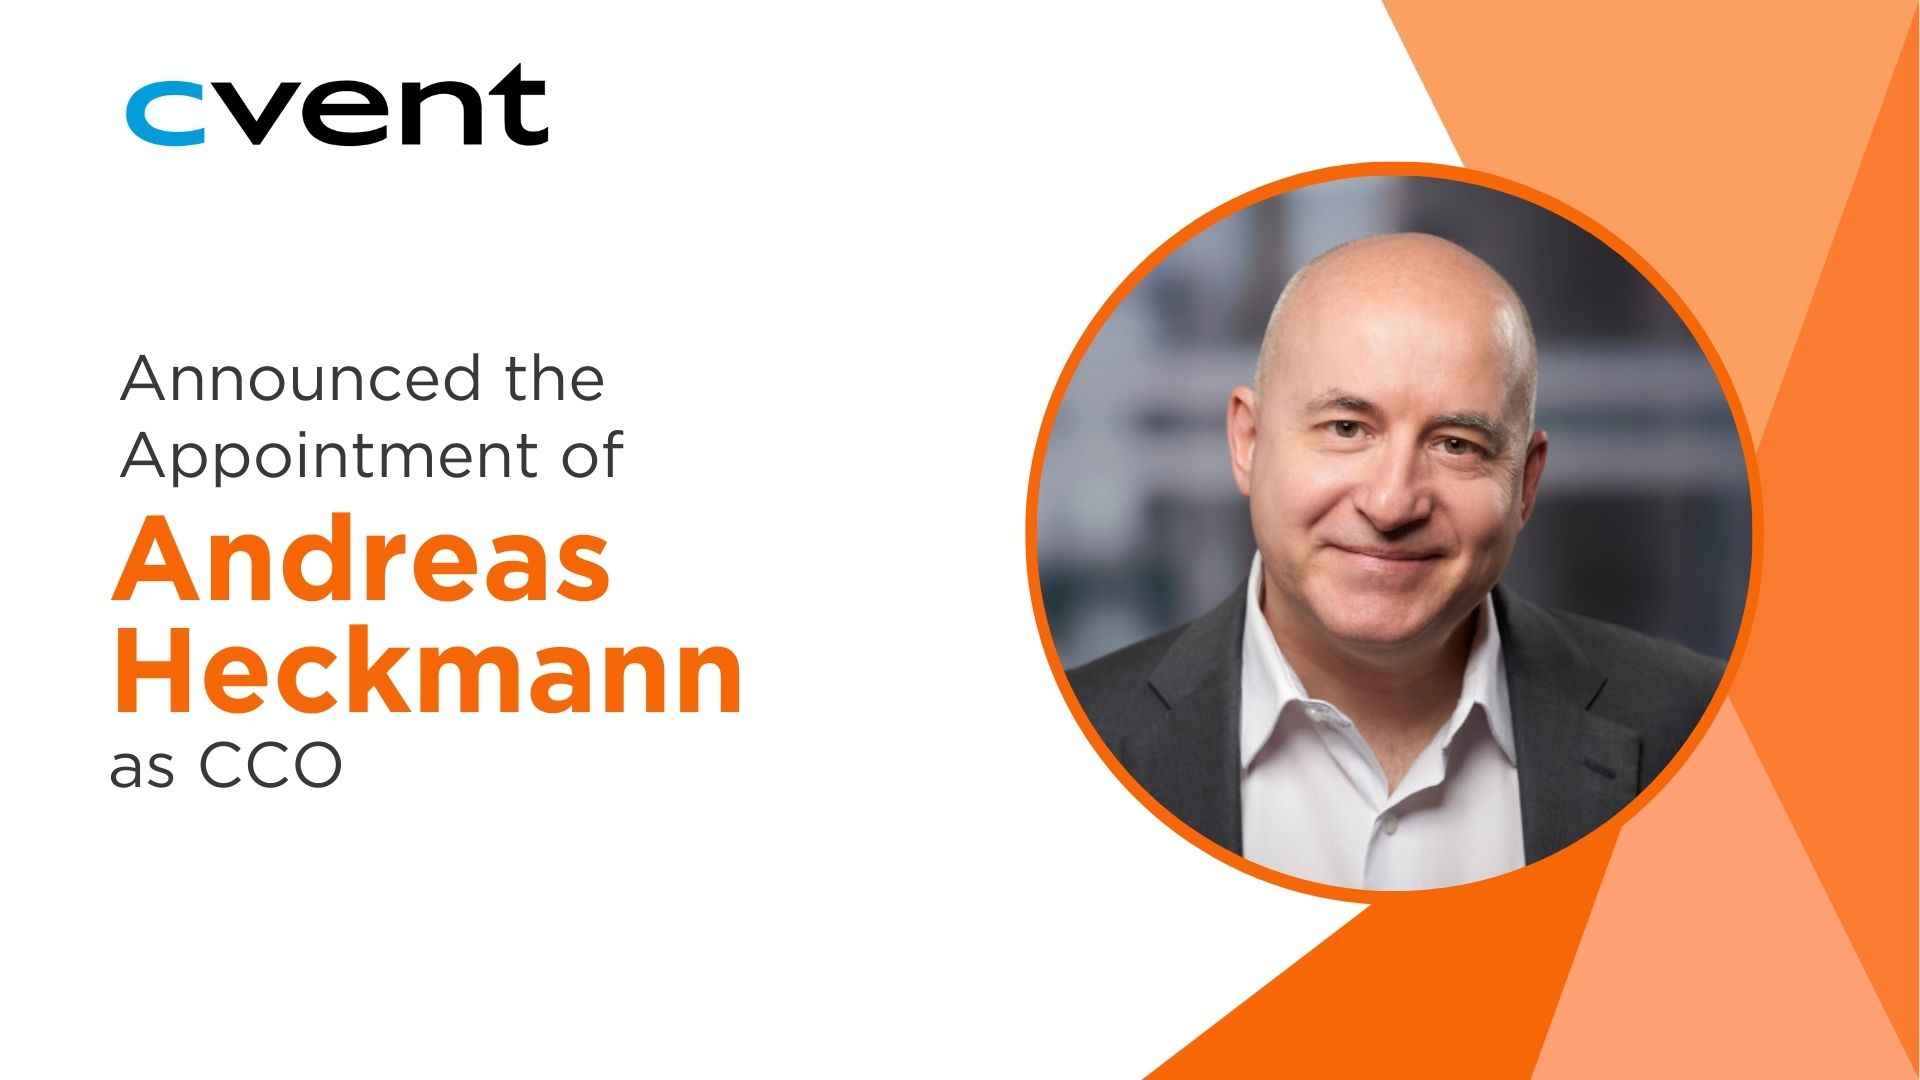 Cvent Appoints Andreas Heckmann as Chief Customer Officer to Drive Client Success